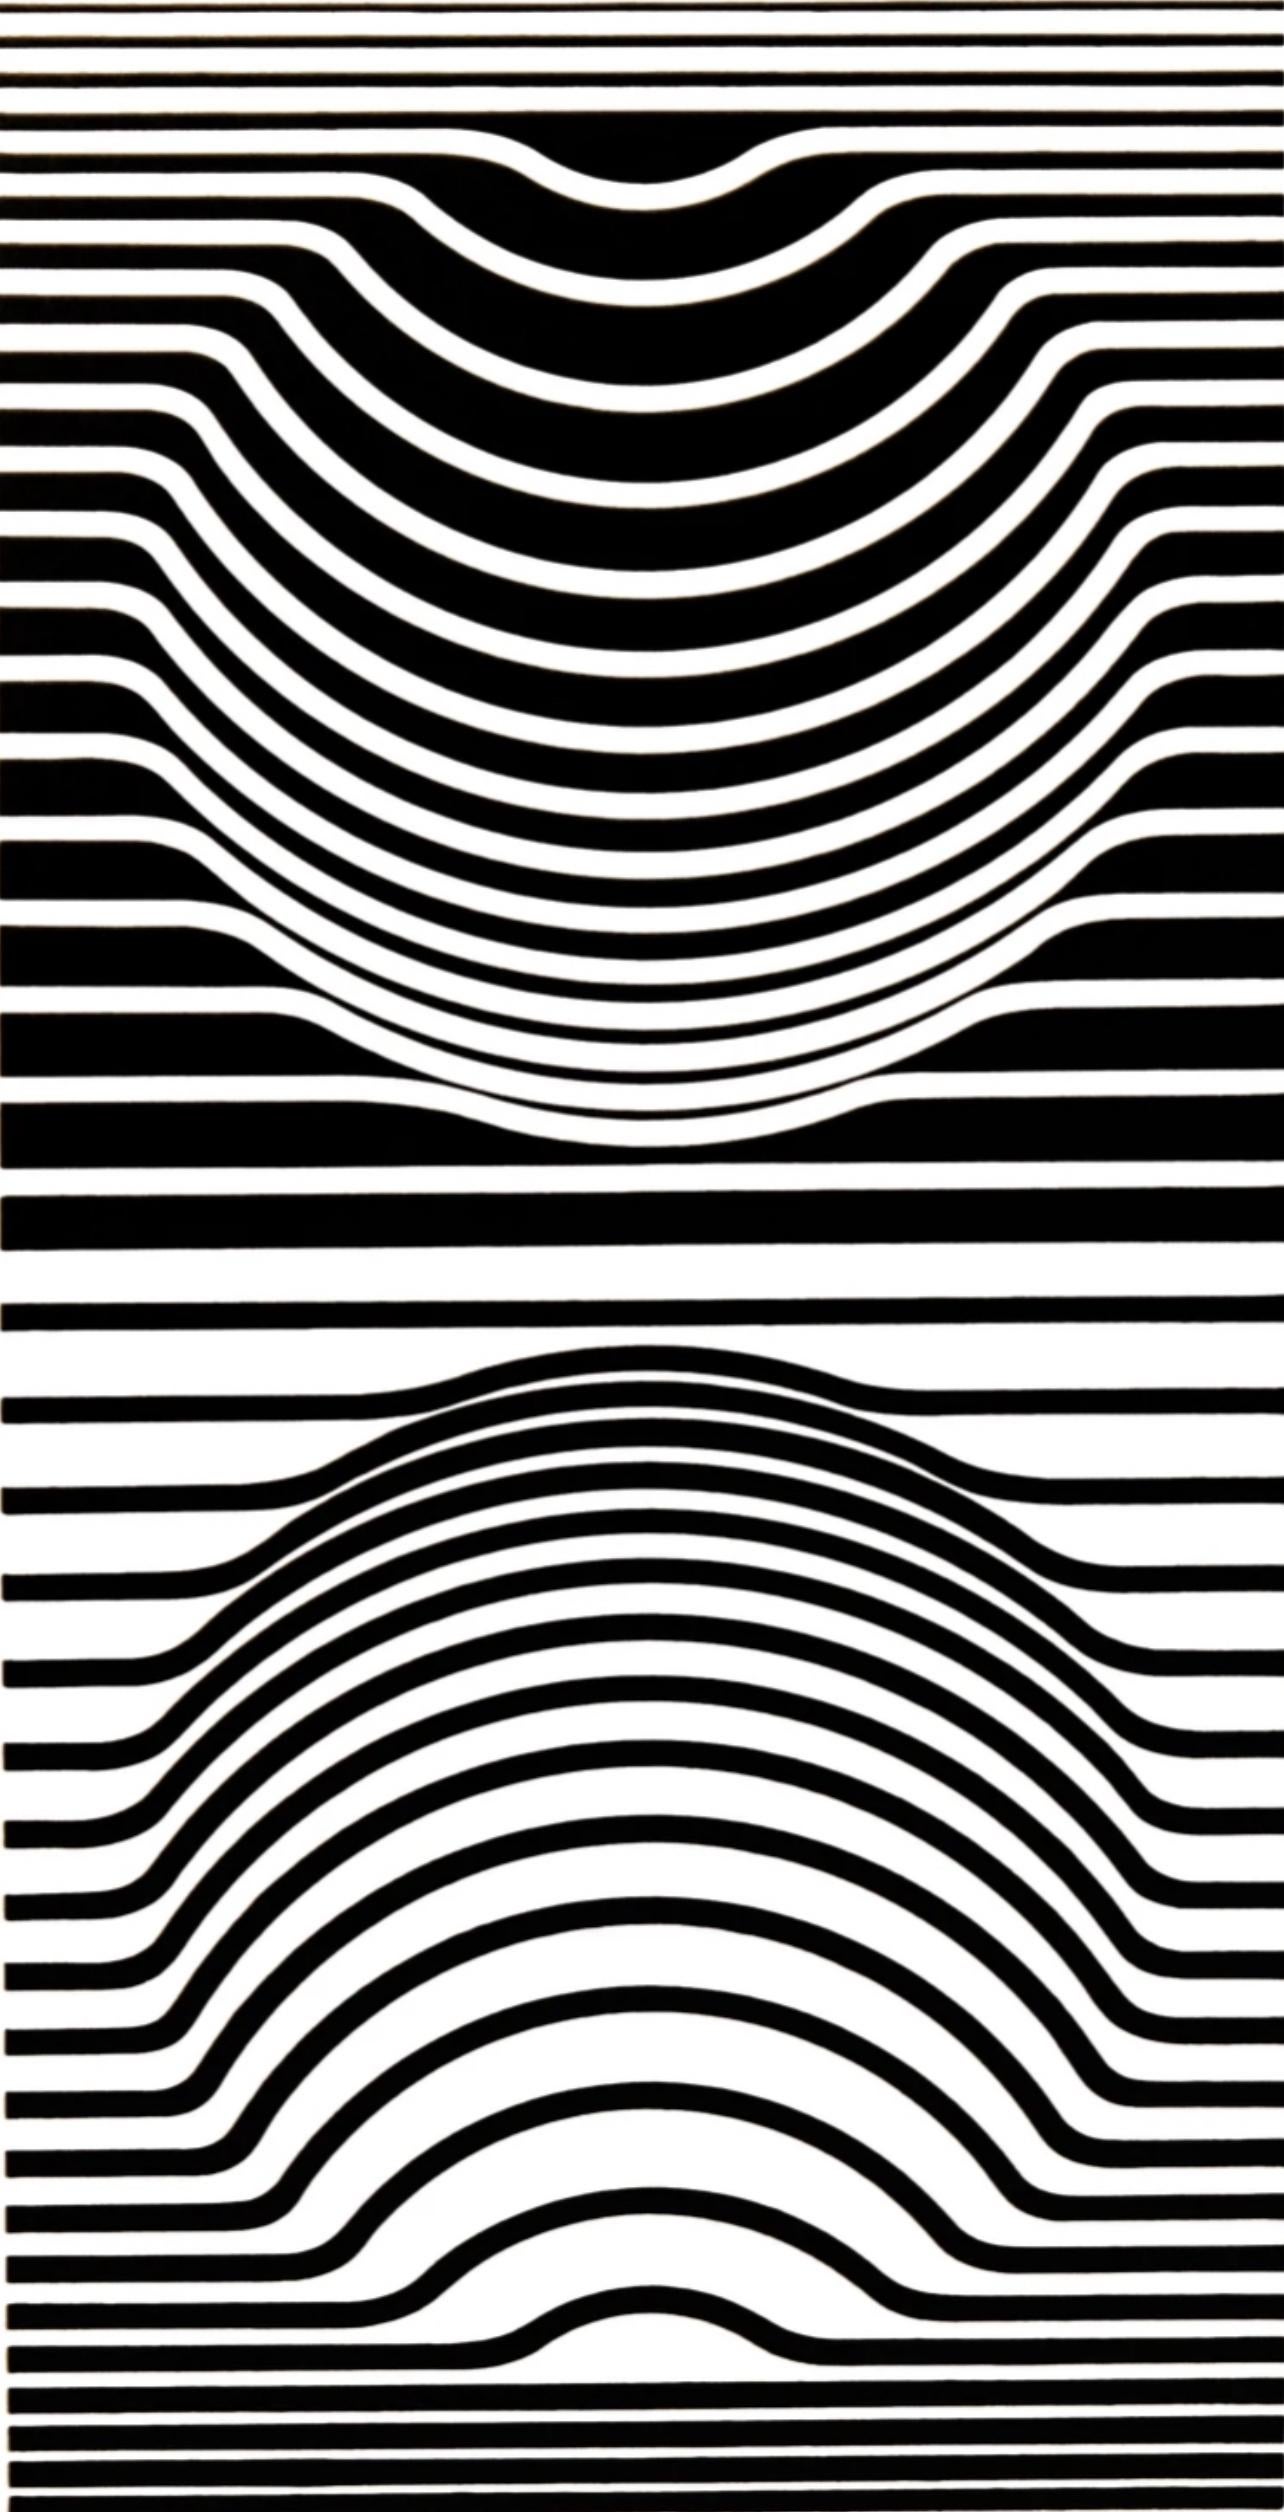 Vasarely, Composition, Ondulatoires (after)